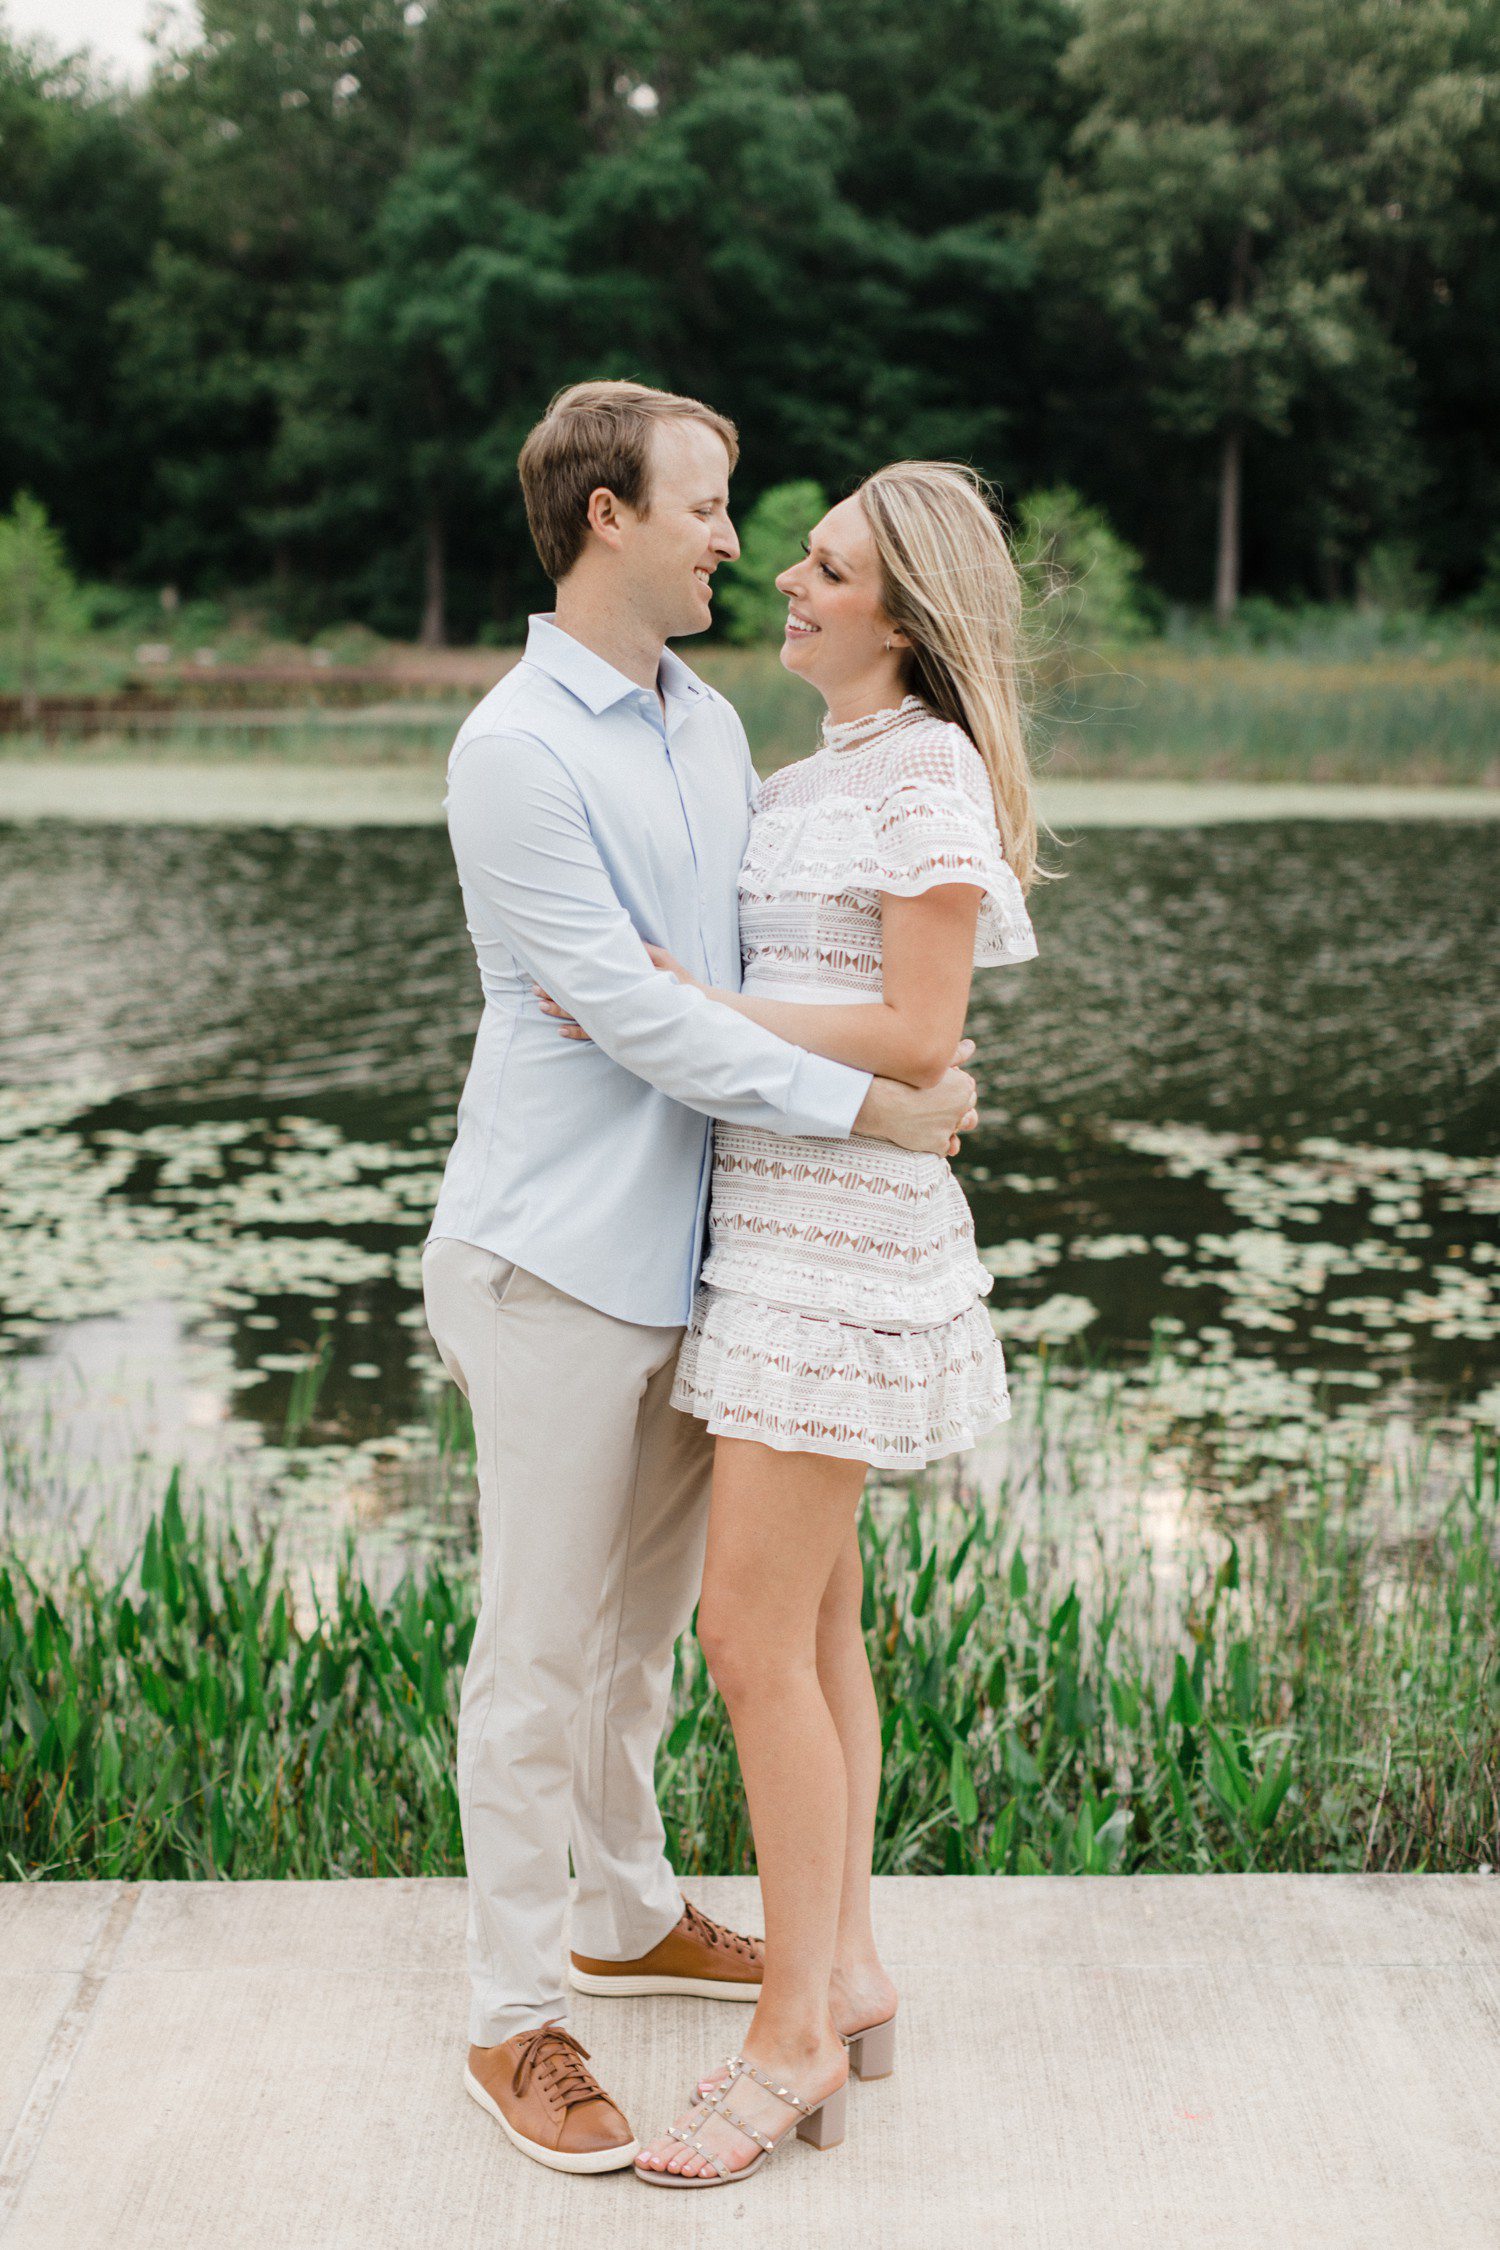 Engagement session at Hines Lake in Memorial park Houston.